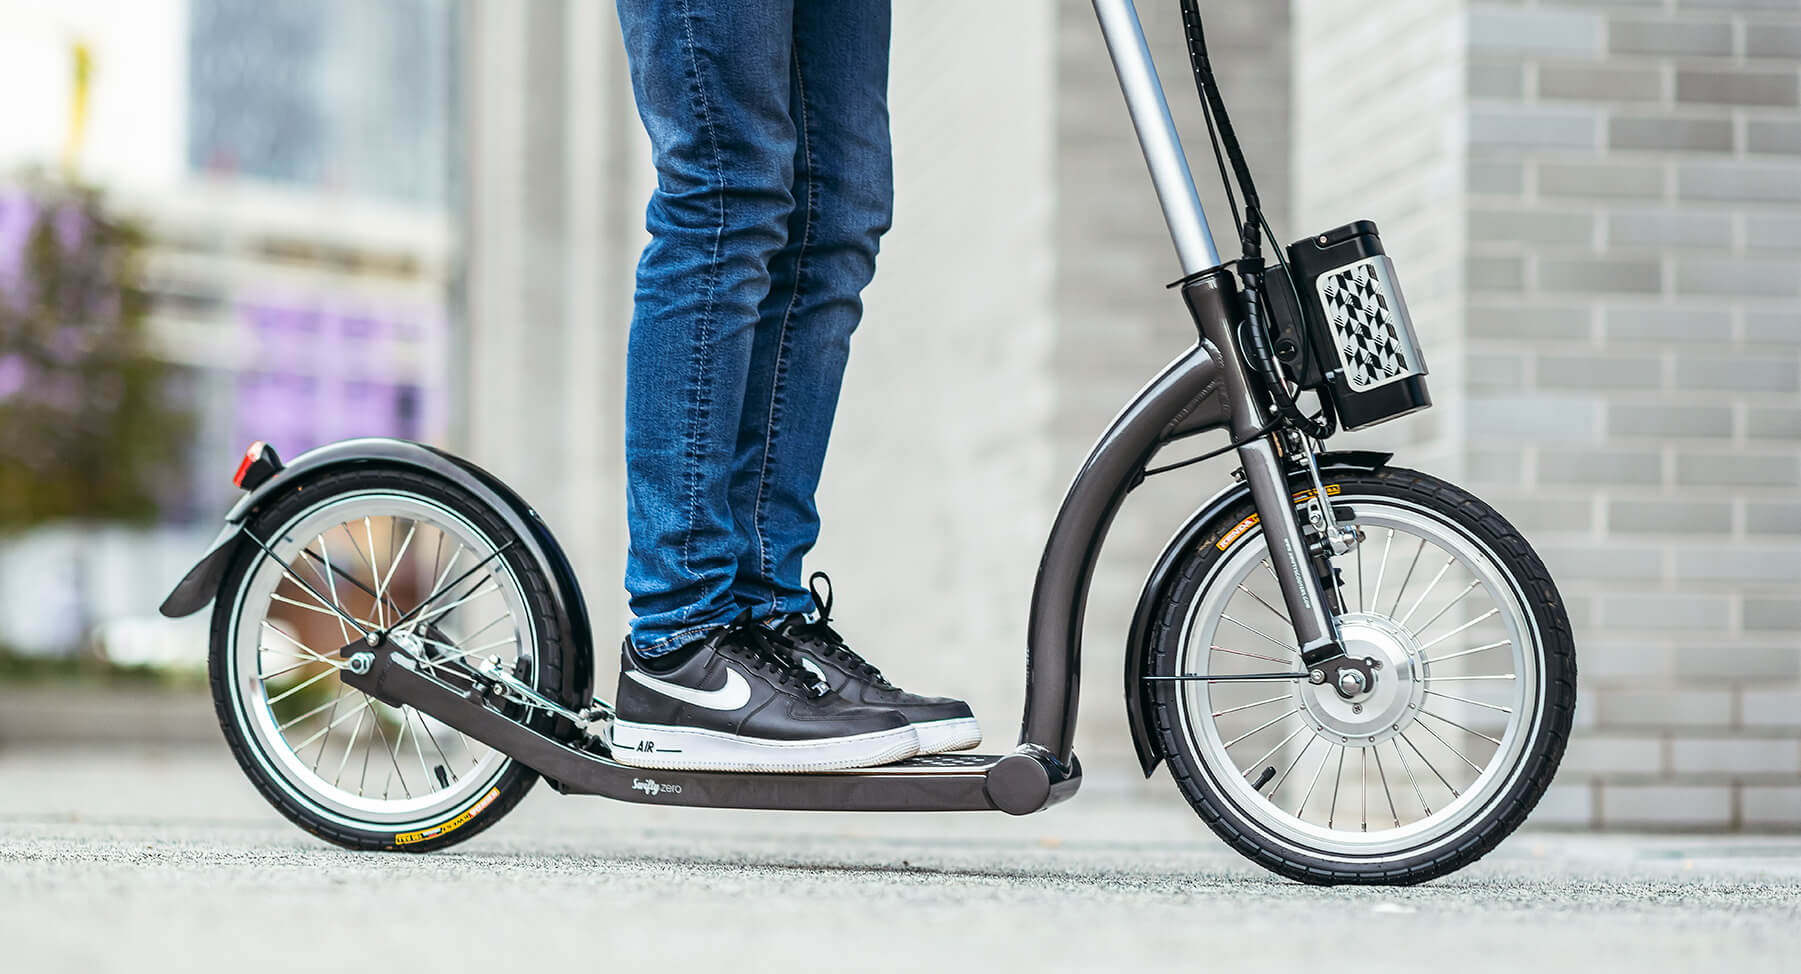 7 Best Rated Adult Kick Scooters in 2022